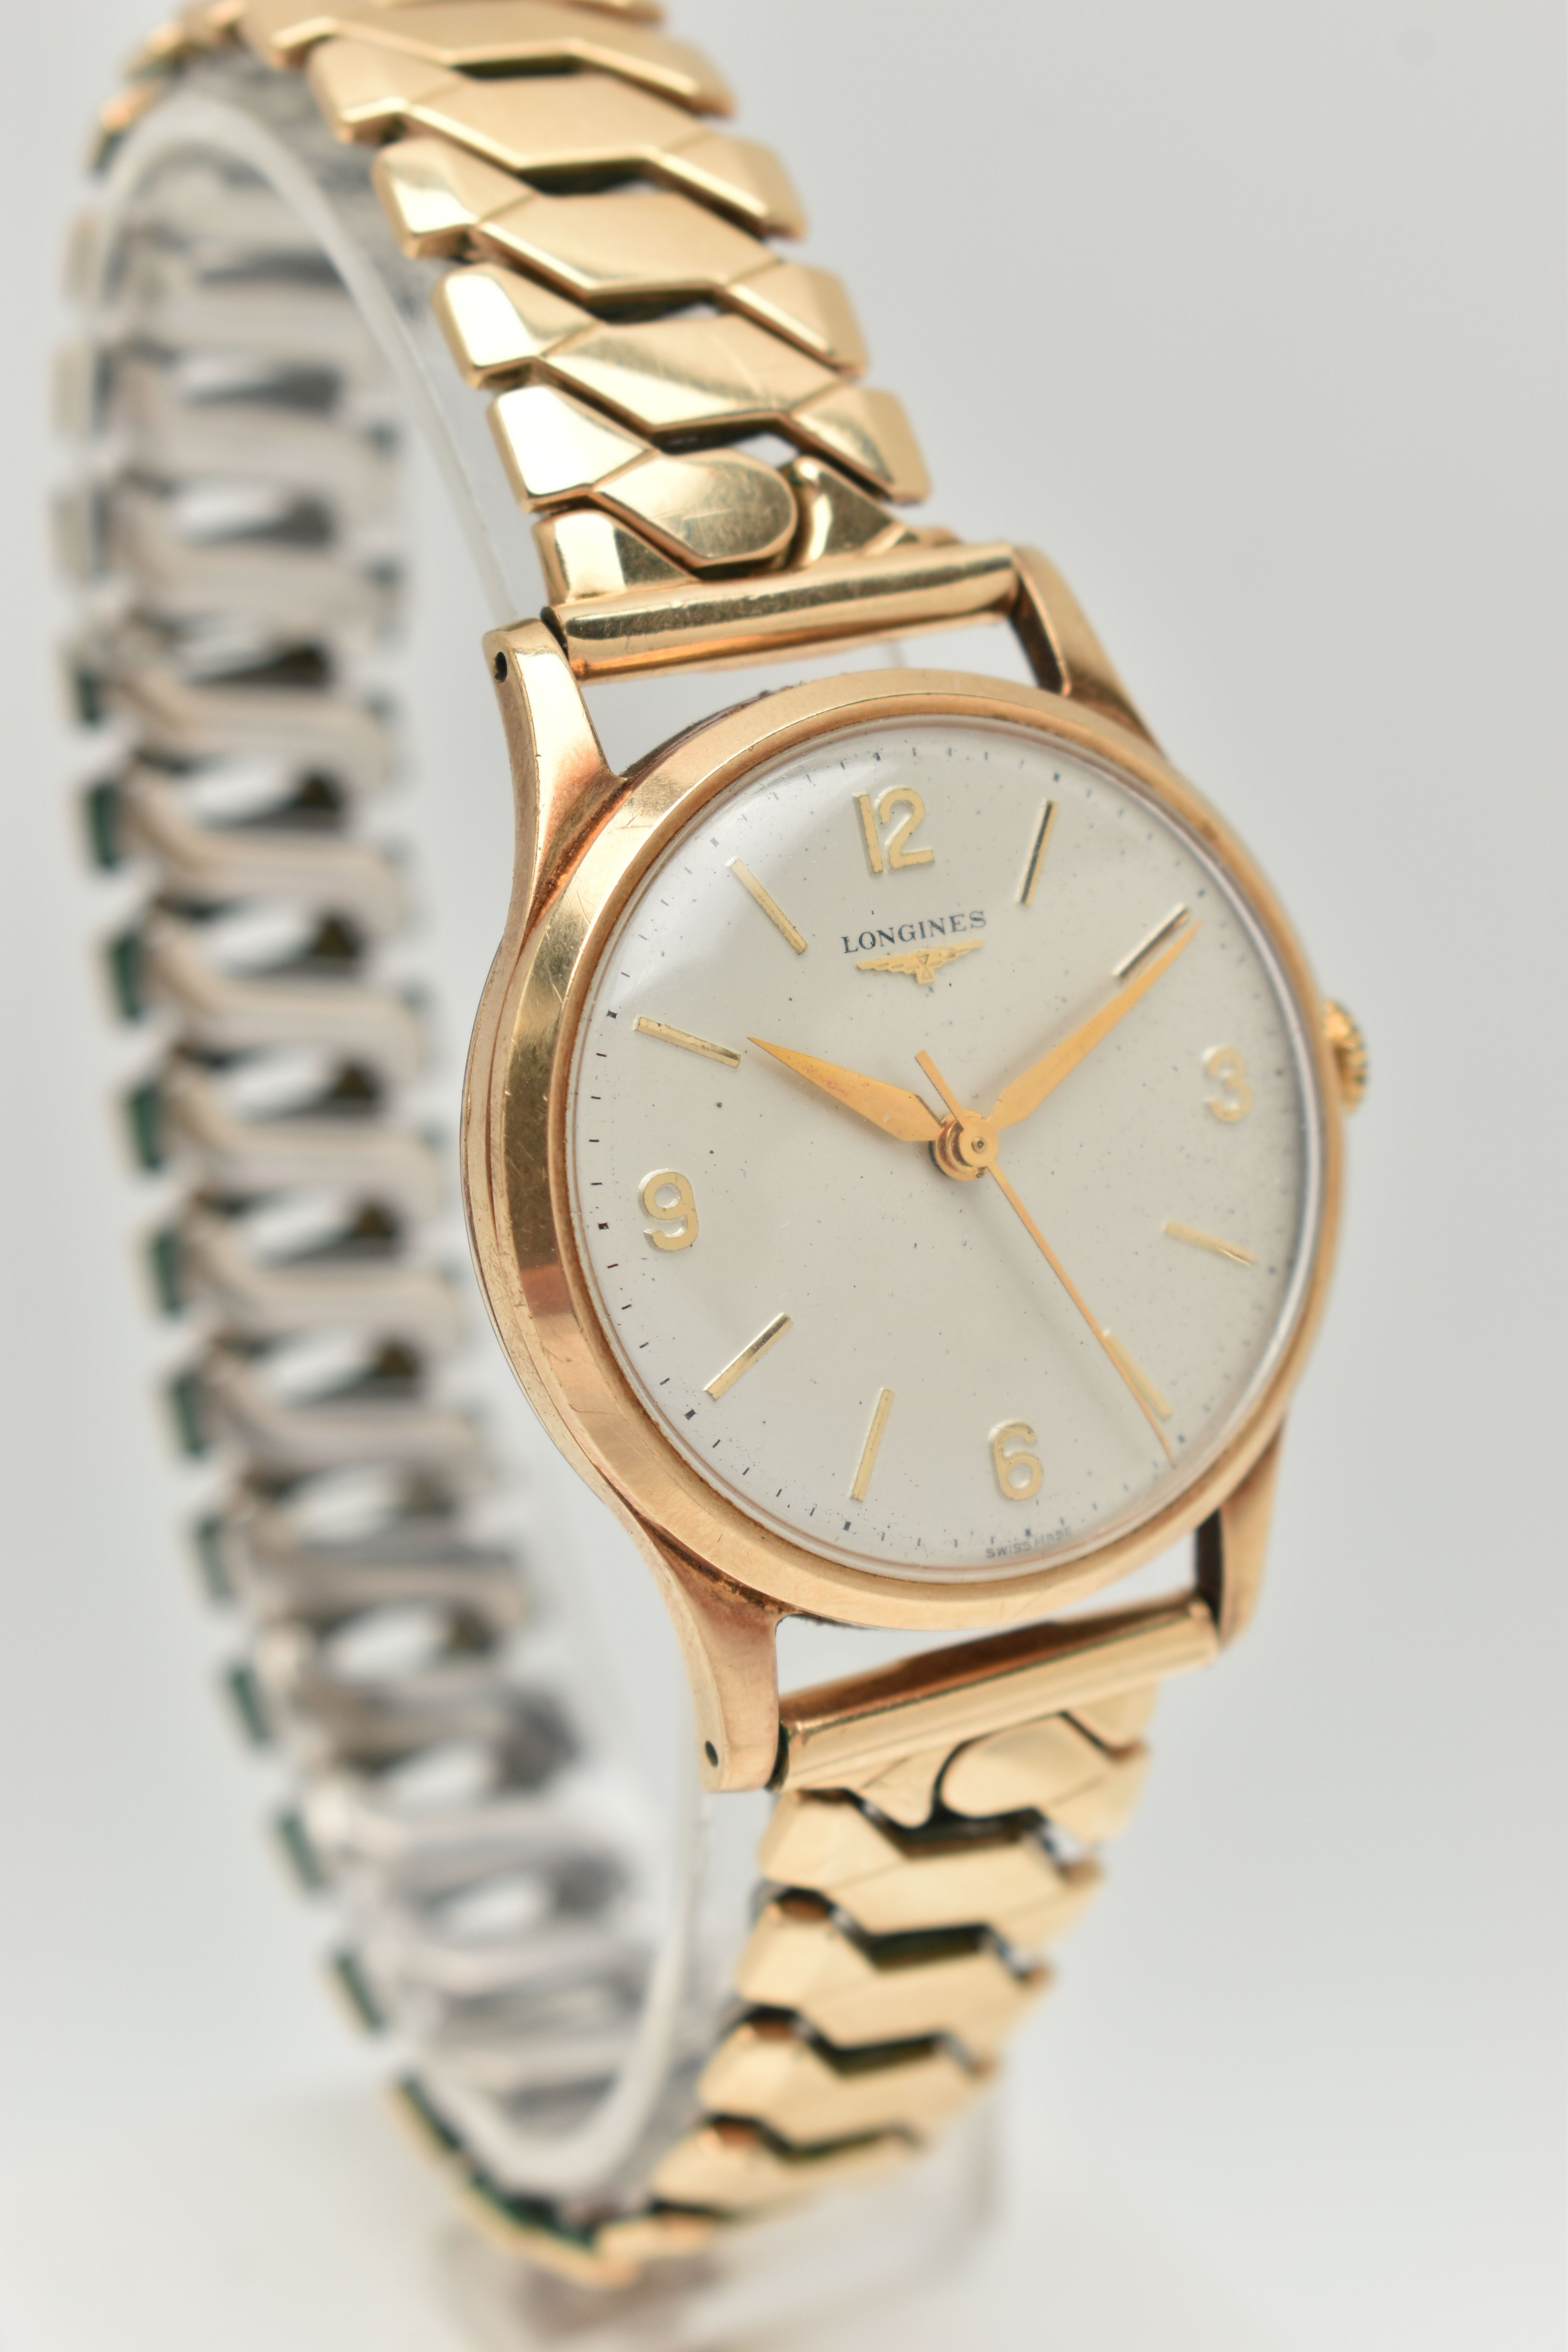 A GENTS 9CT GOLD 'LONGINES' WRISTWATCH, manual wind, round silver dial signed 'Longines', Arabic - Image 2 of 6